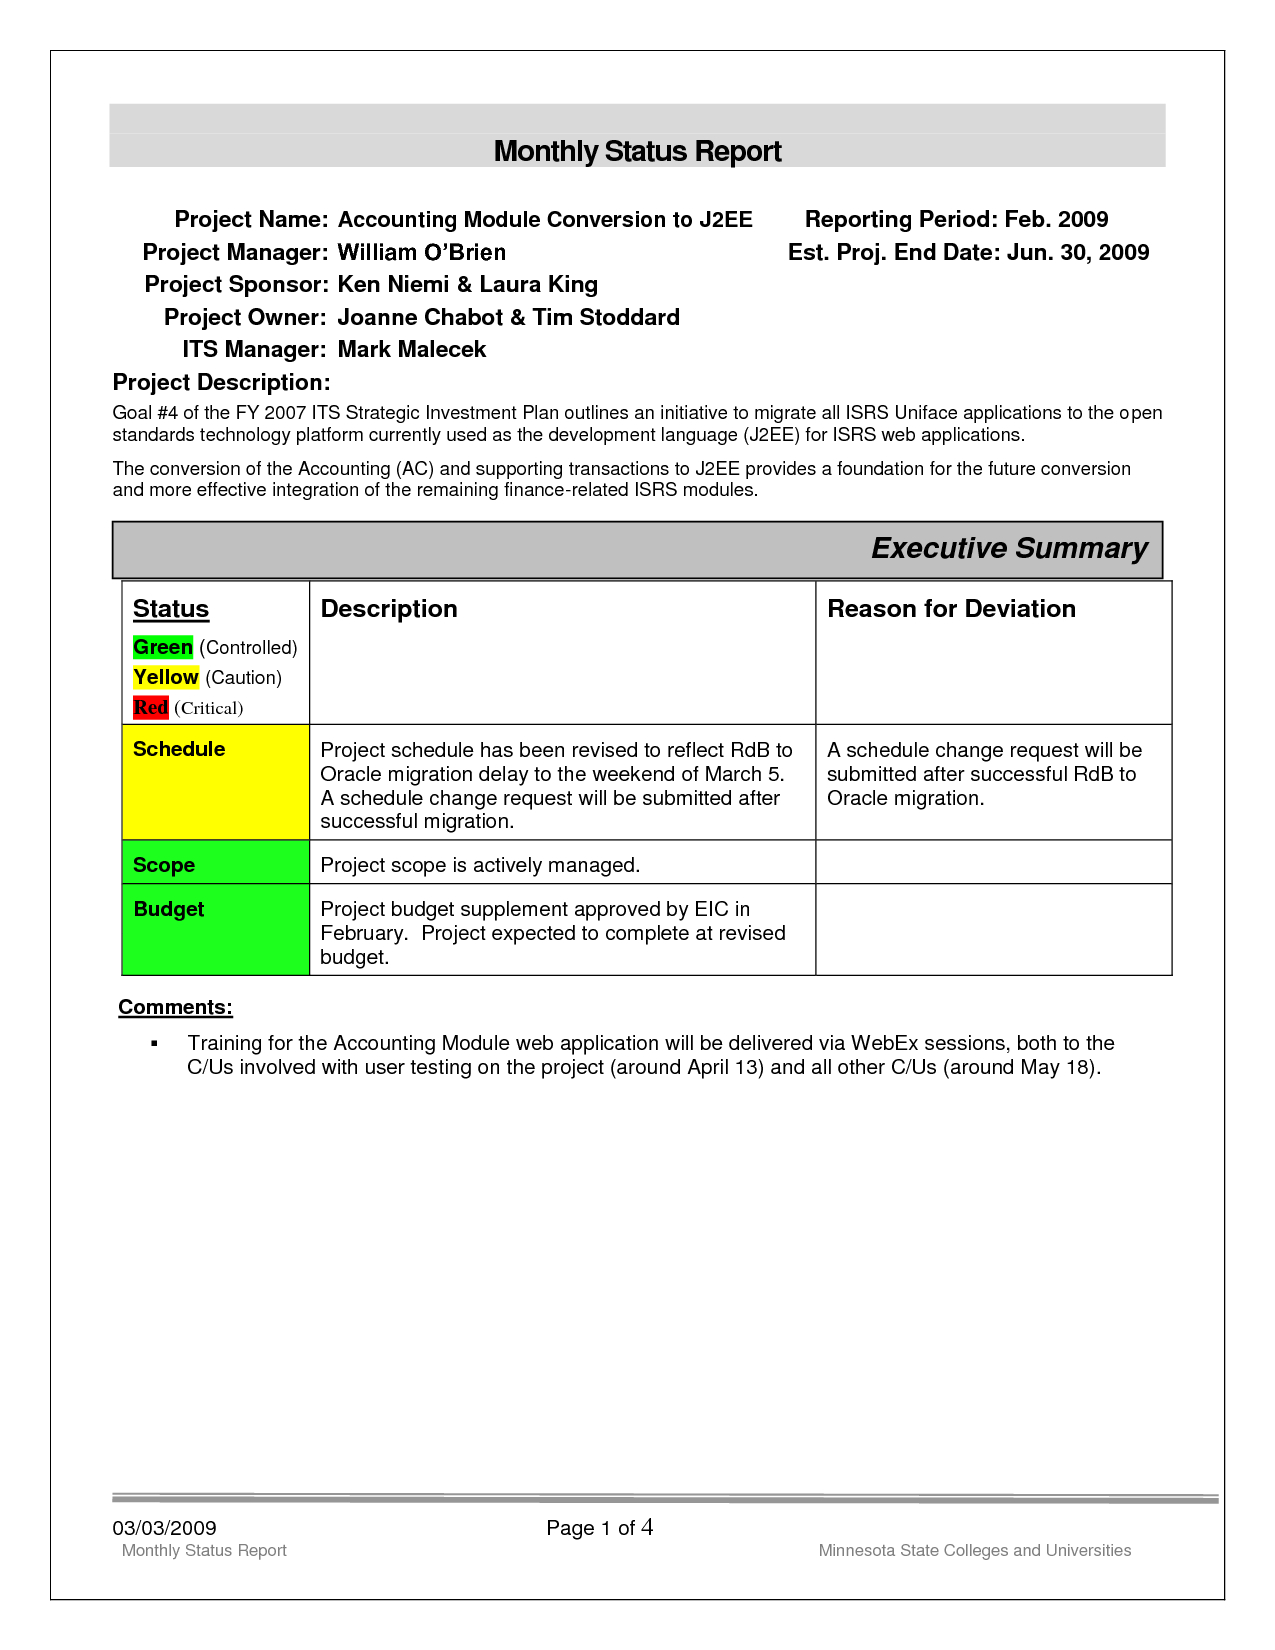 Replacethis] Monthly Status Report Template Format And With Monthly Status Report Template